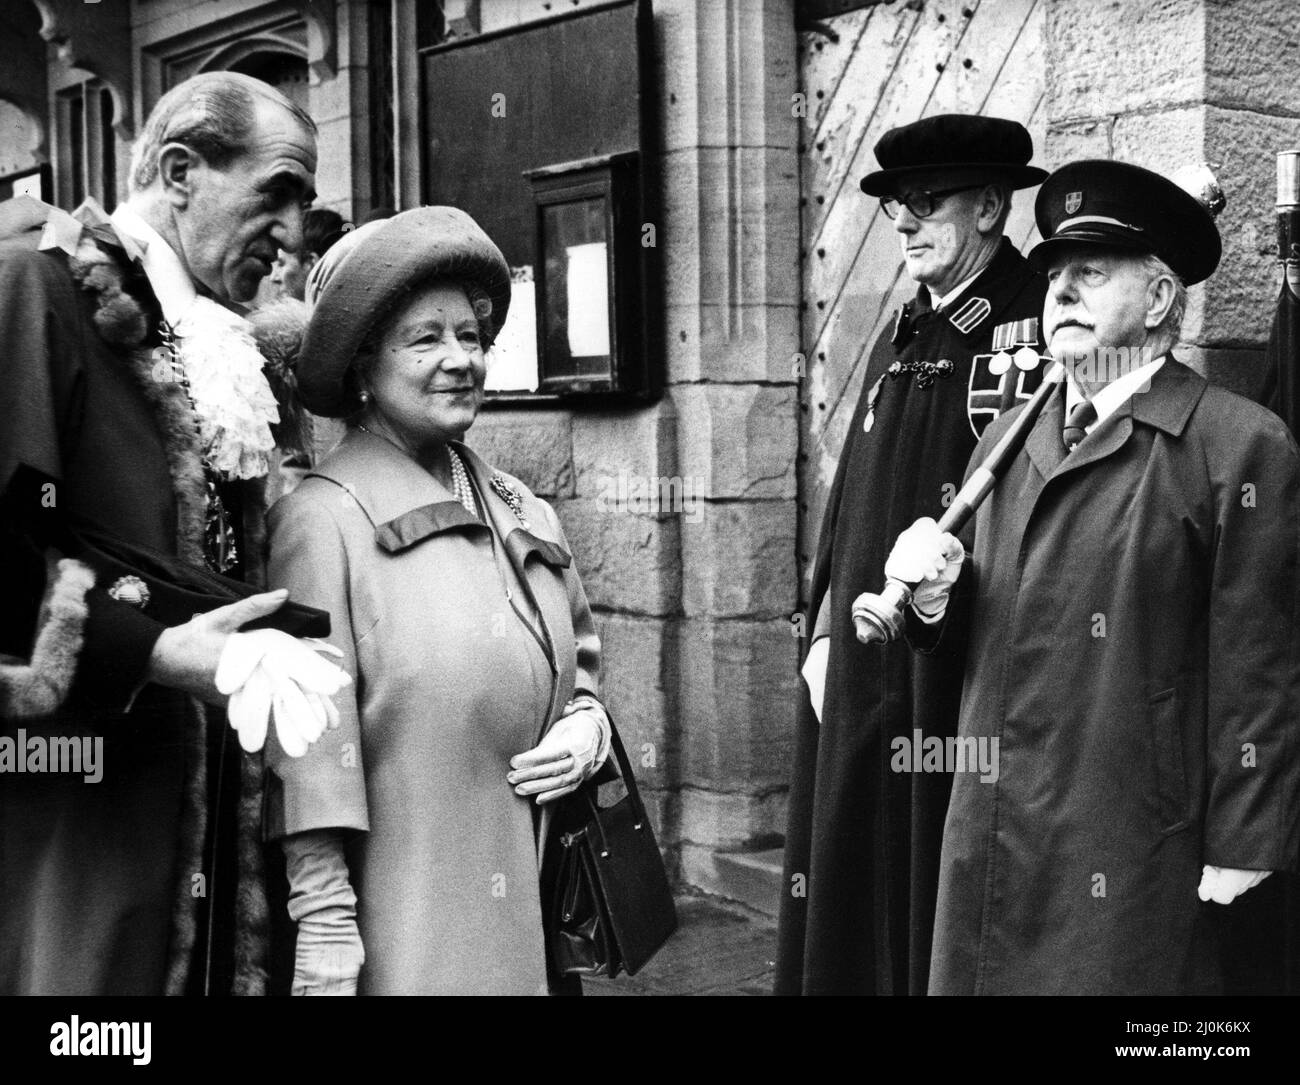 Queen Elizabeth the Queen Mother  North East Visits  Queen Elizabeth the Queen Mother visits Durham 6 November 1980 with the Mayor, Coun Joe Anderson Stock Photo